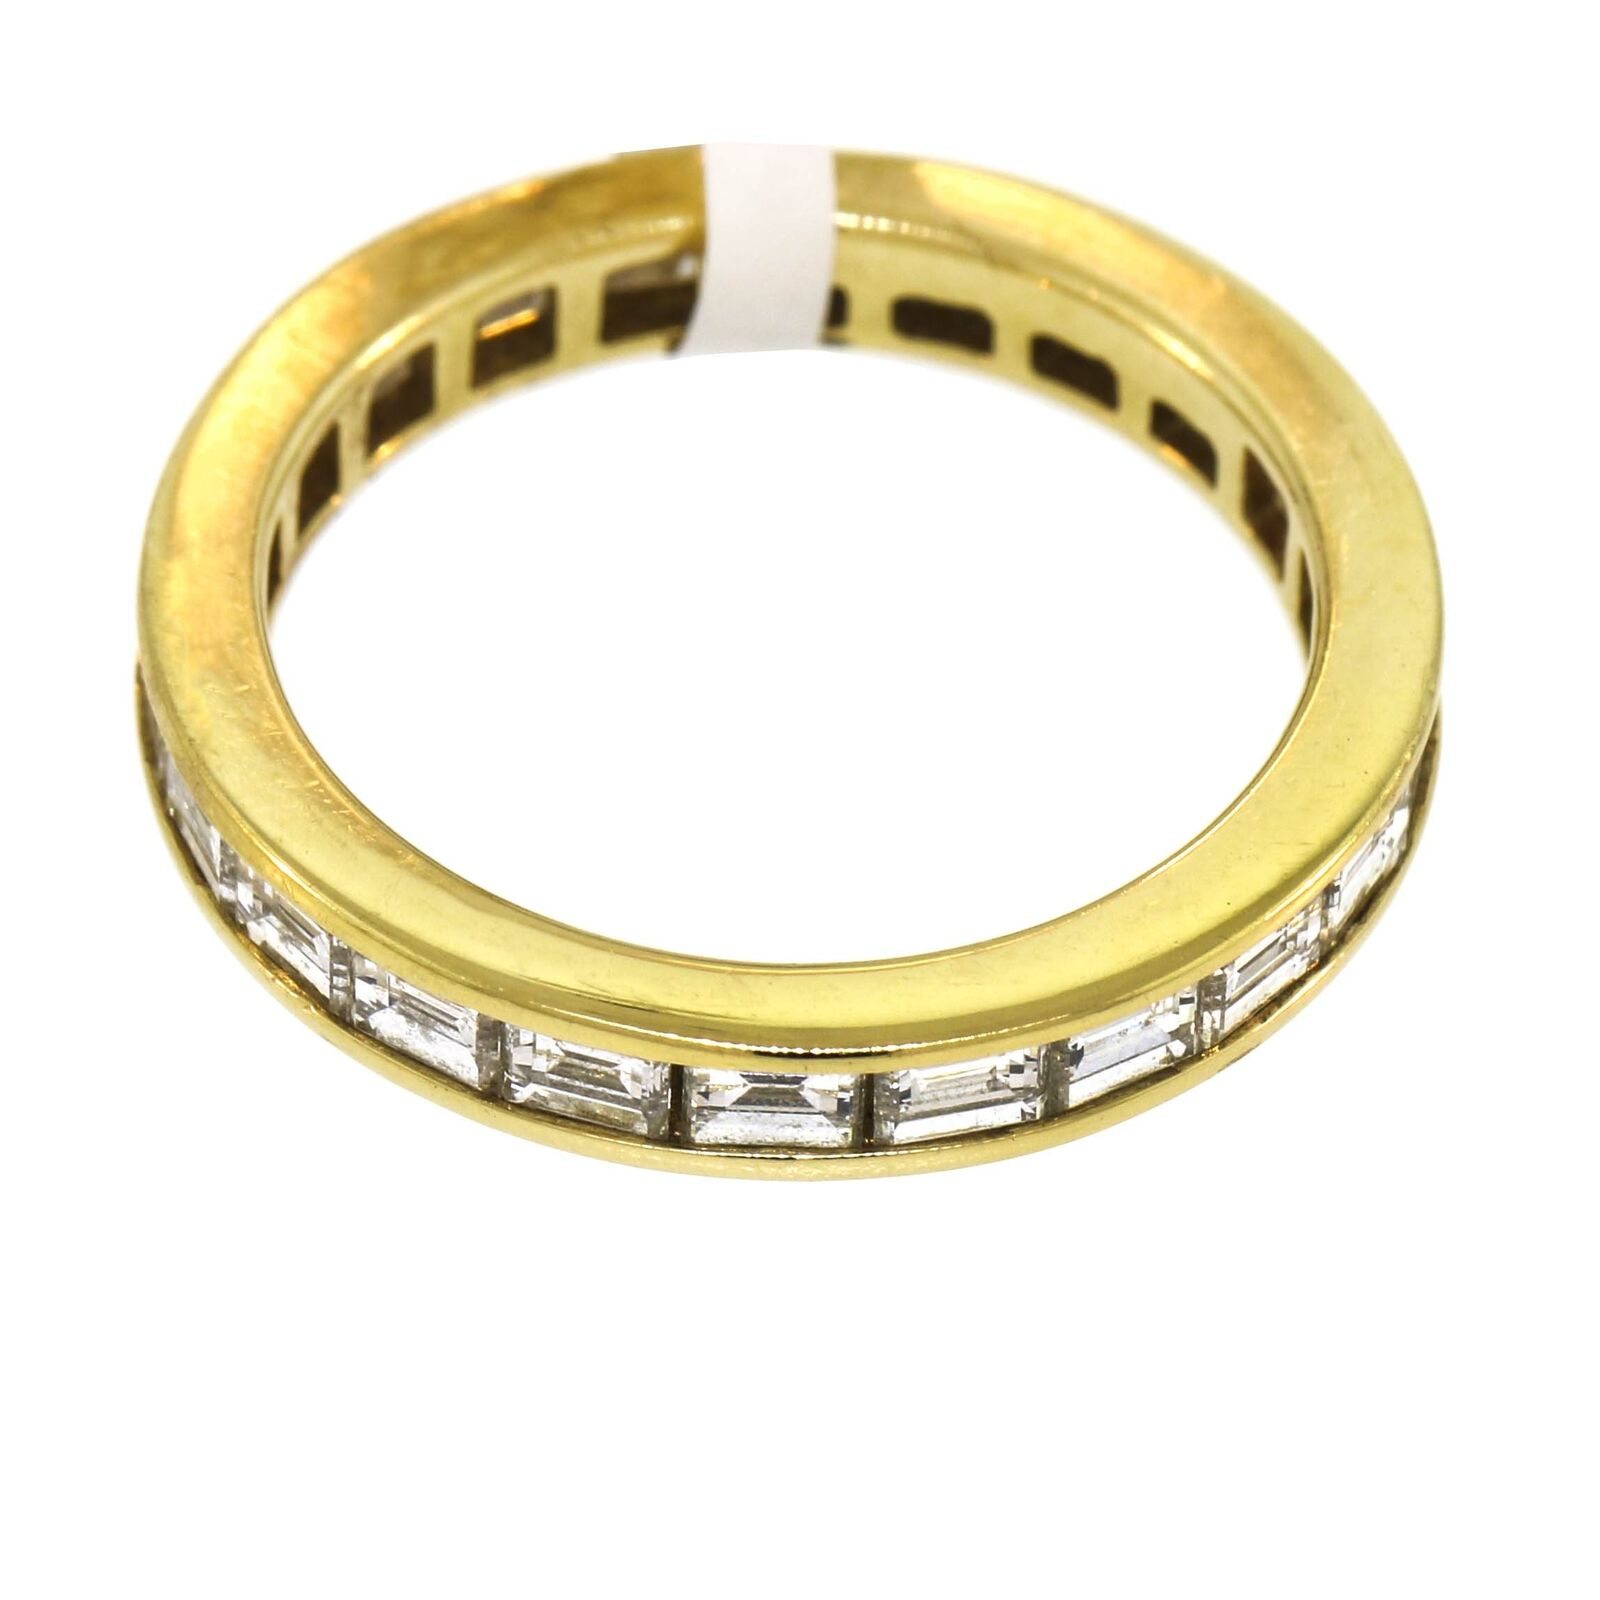 Image of Tiffany & Co. Diamond Eternity Band in 18k Yellow Gold